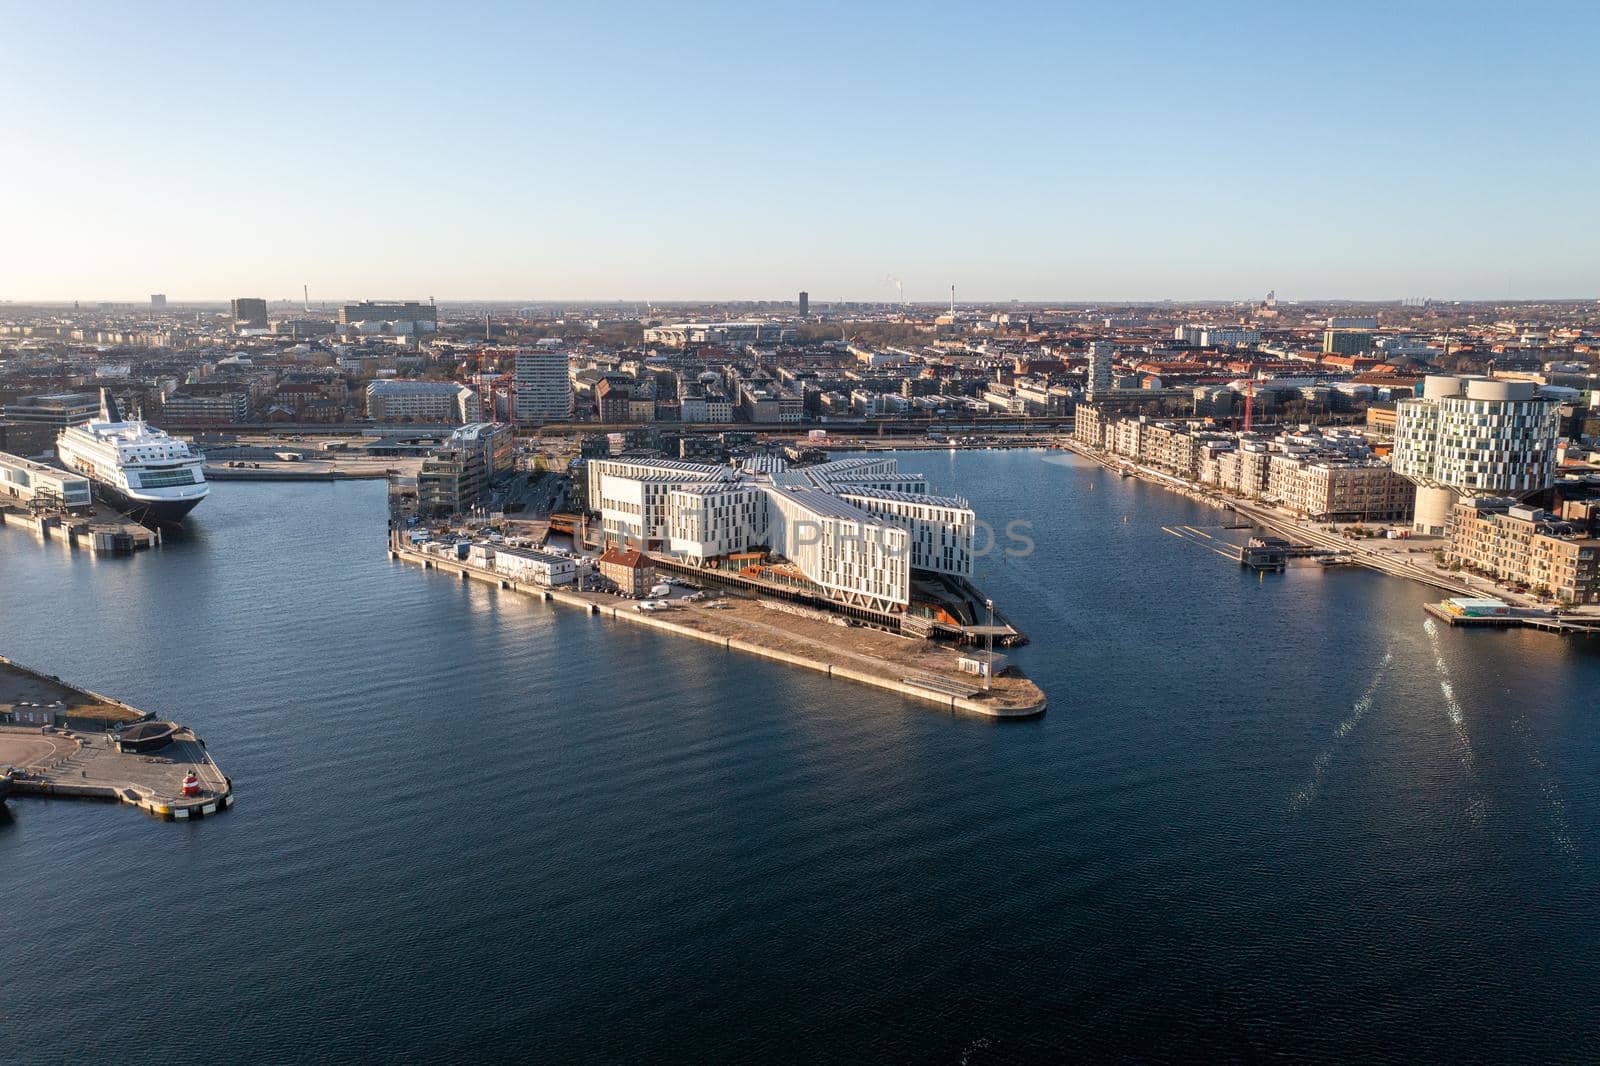 Copenhagen, Denmark - January 06, 2022: Aerial drone view of the UN City builing